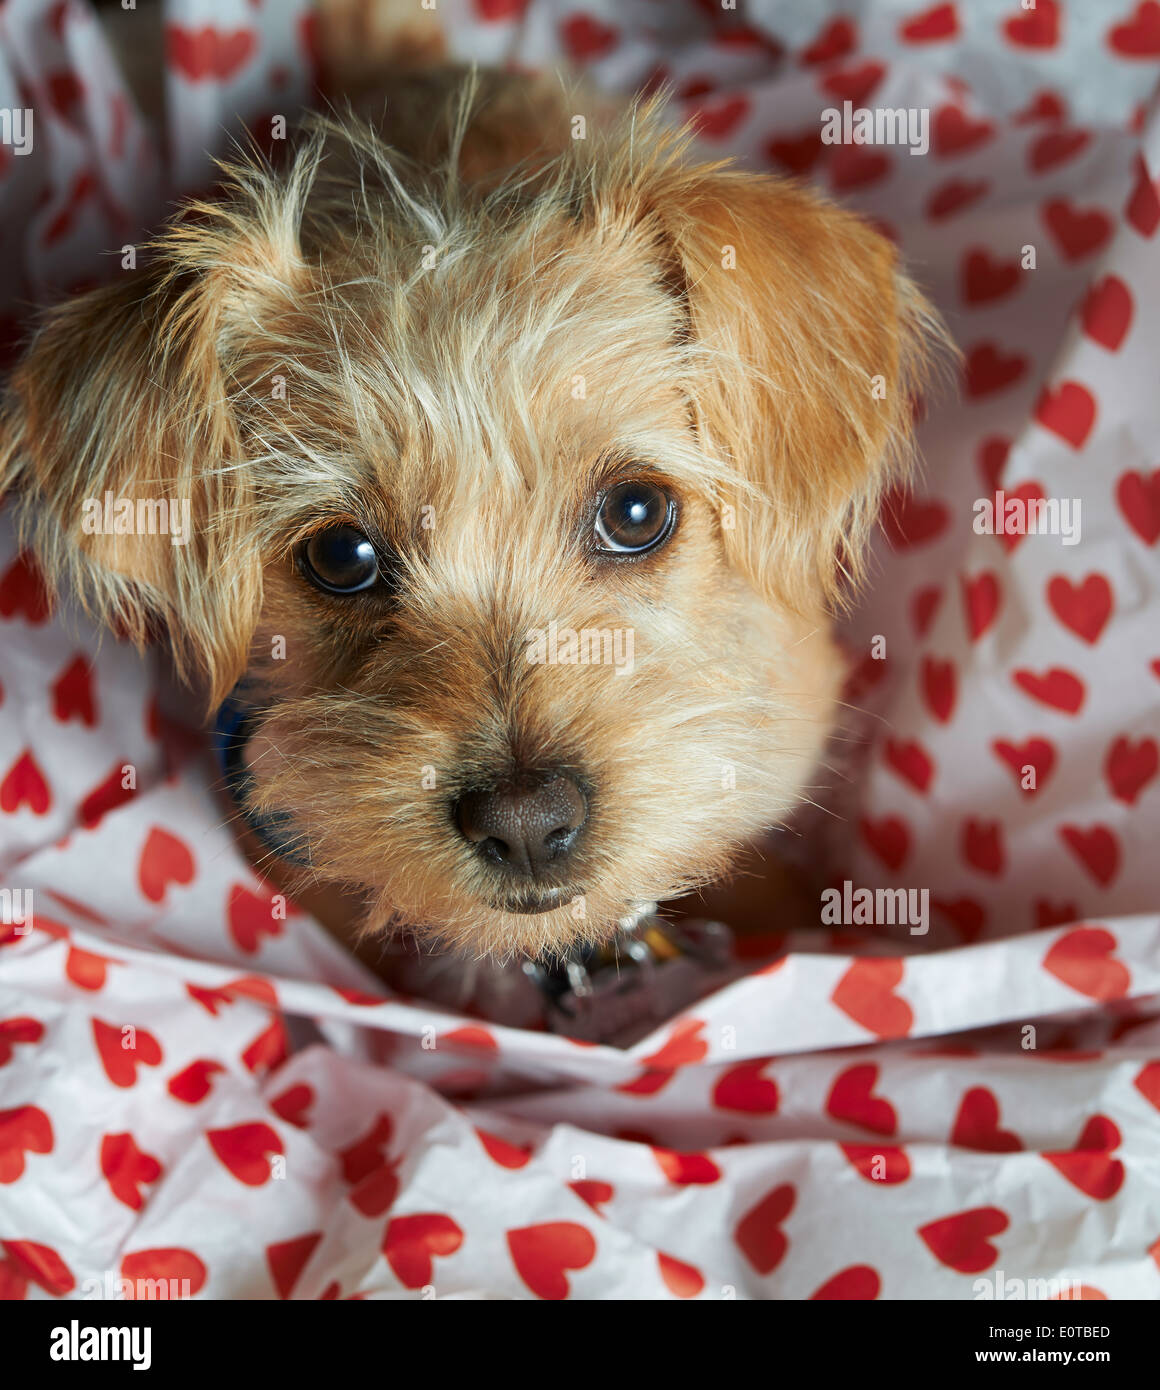 Tan dog surrounded by hearts looking up Stock Photo